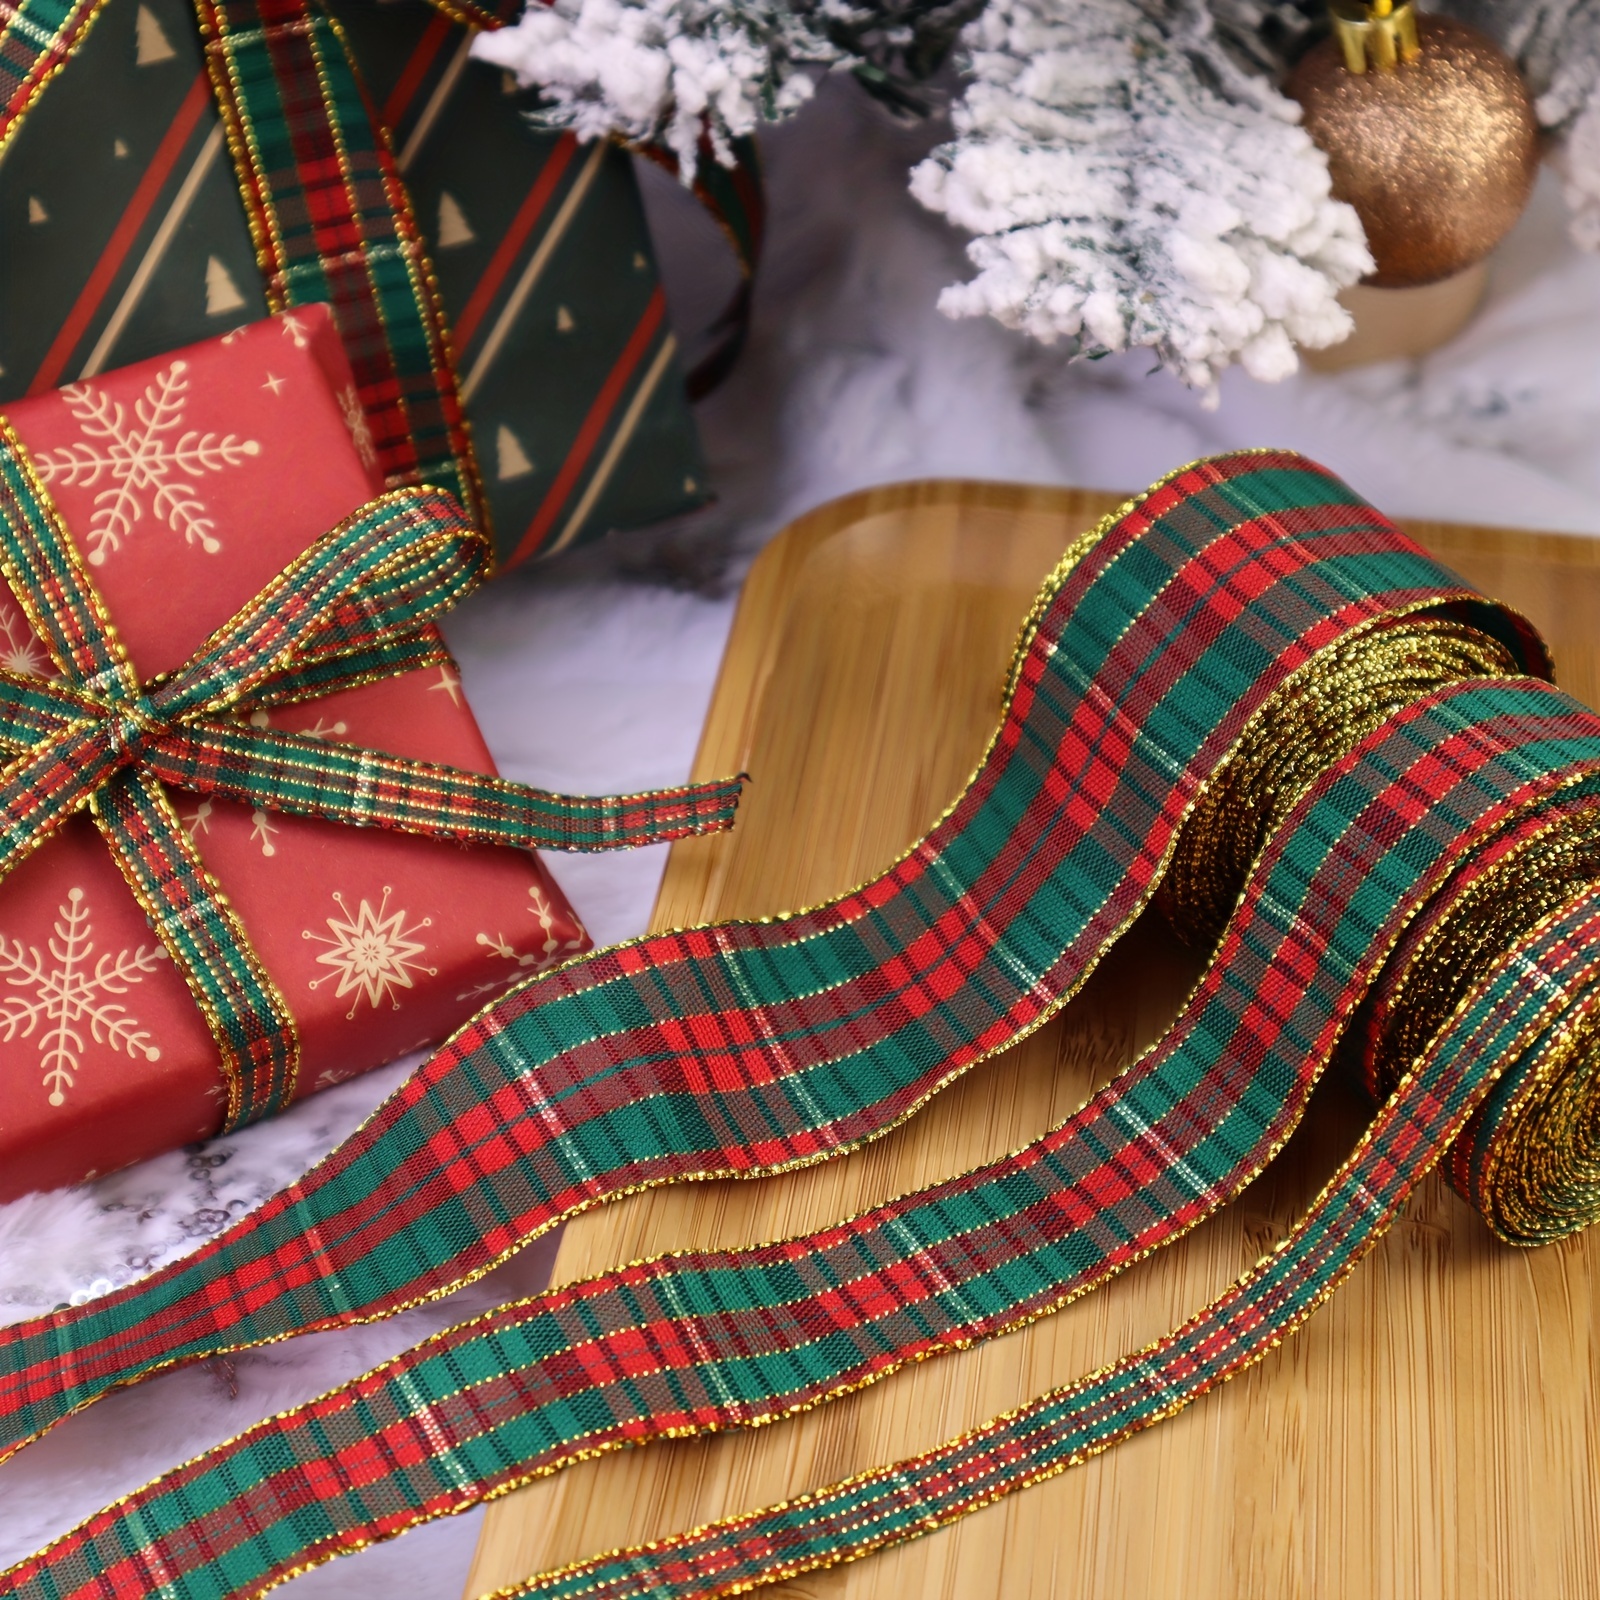 19.6 Yard 2.5 inch Wide Buffalo Plaid Ribbons Wired Edges, 2 Rolls Black  and White Checkered Ribbon for Christmas Tree Gift Decorations